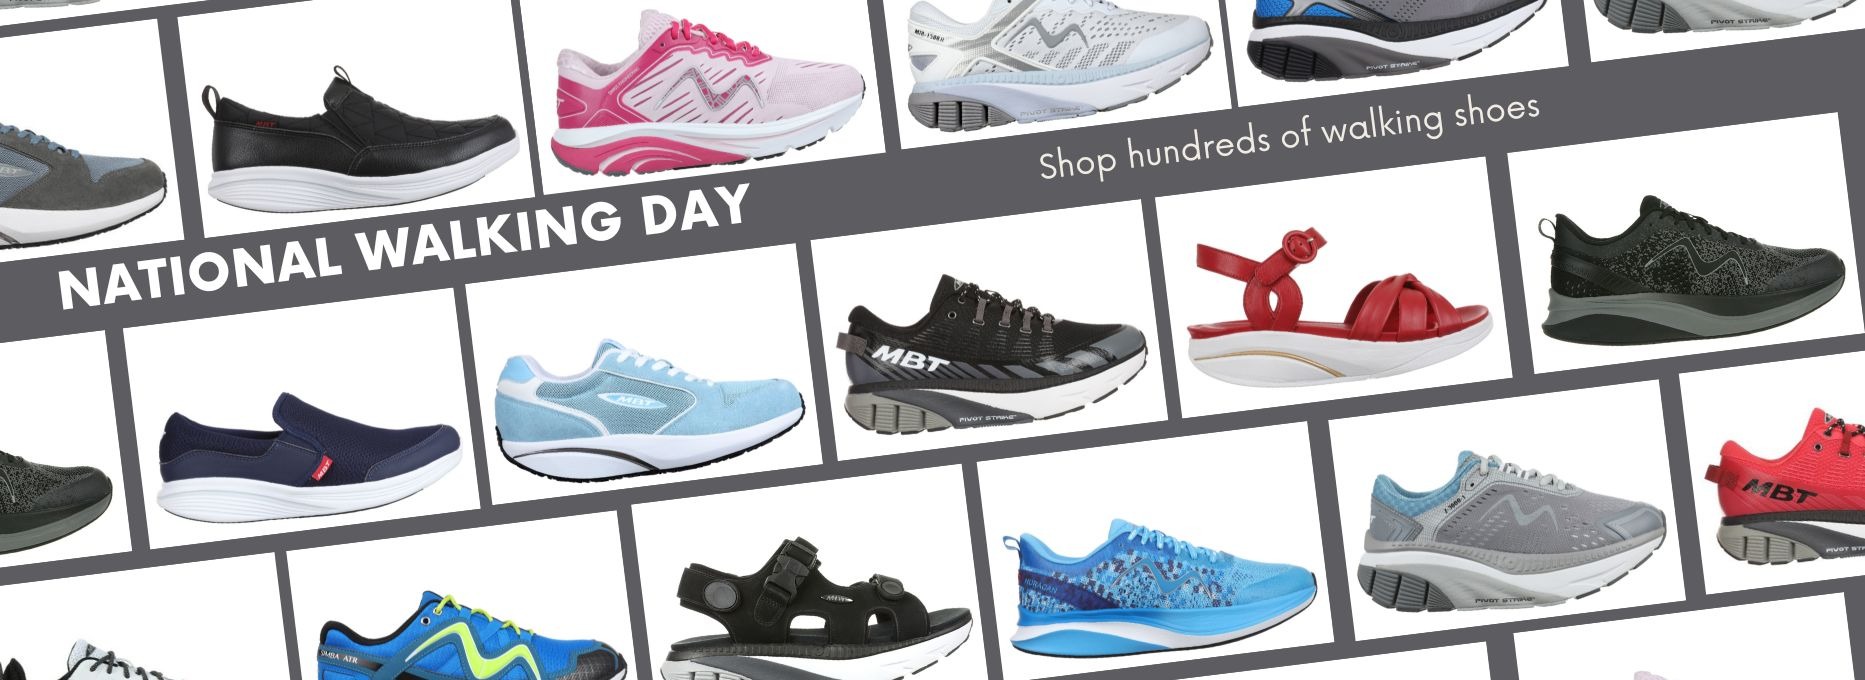 Shop over a hundred of our best walking shoes!